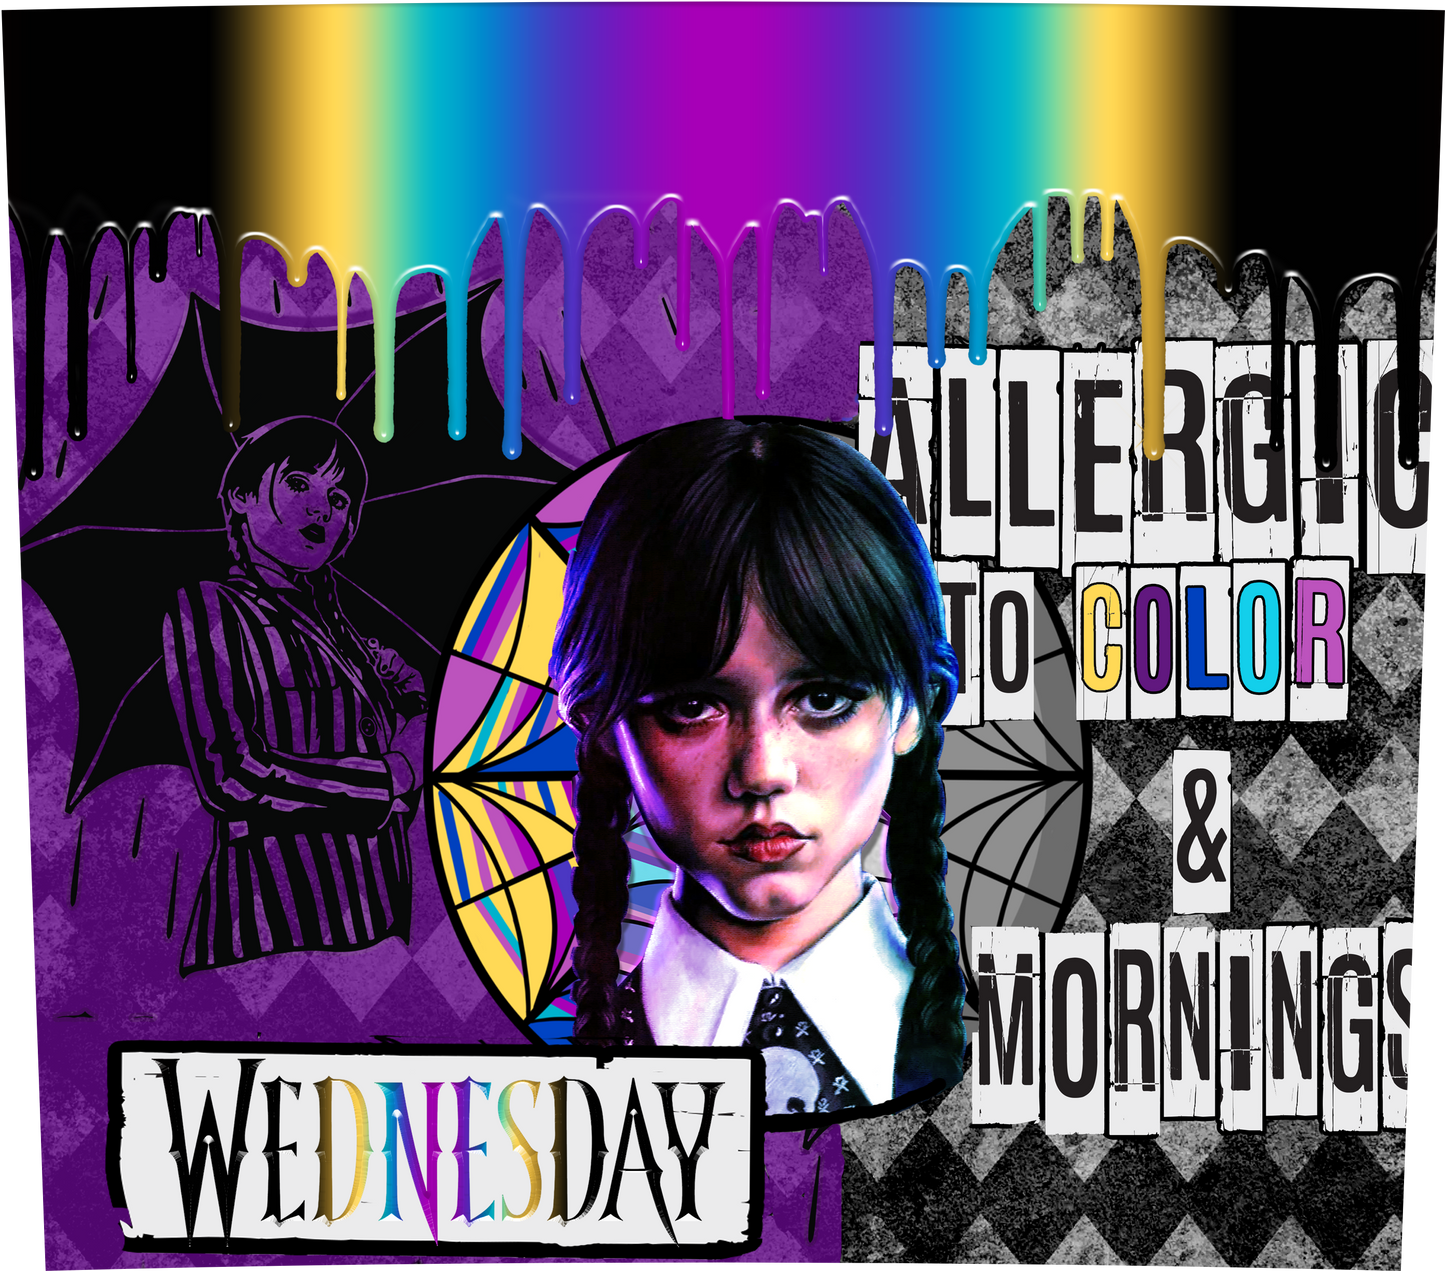 ALLERGIC TO COLOR AND MORNINGS WEDNESDAY